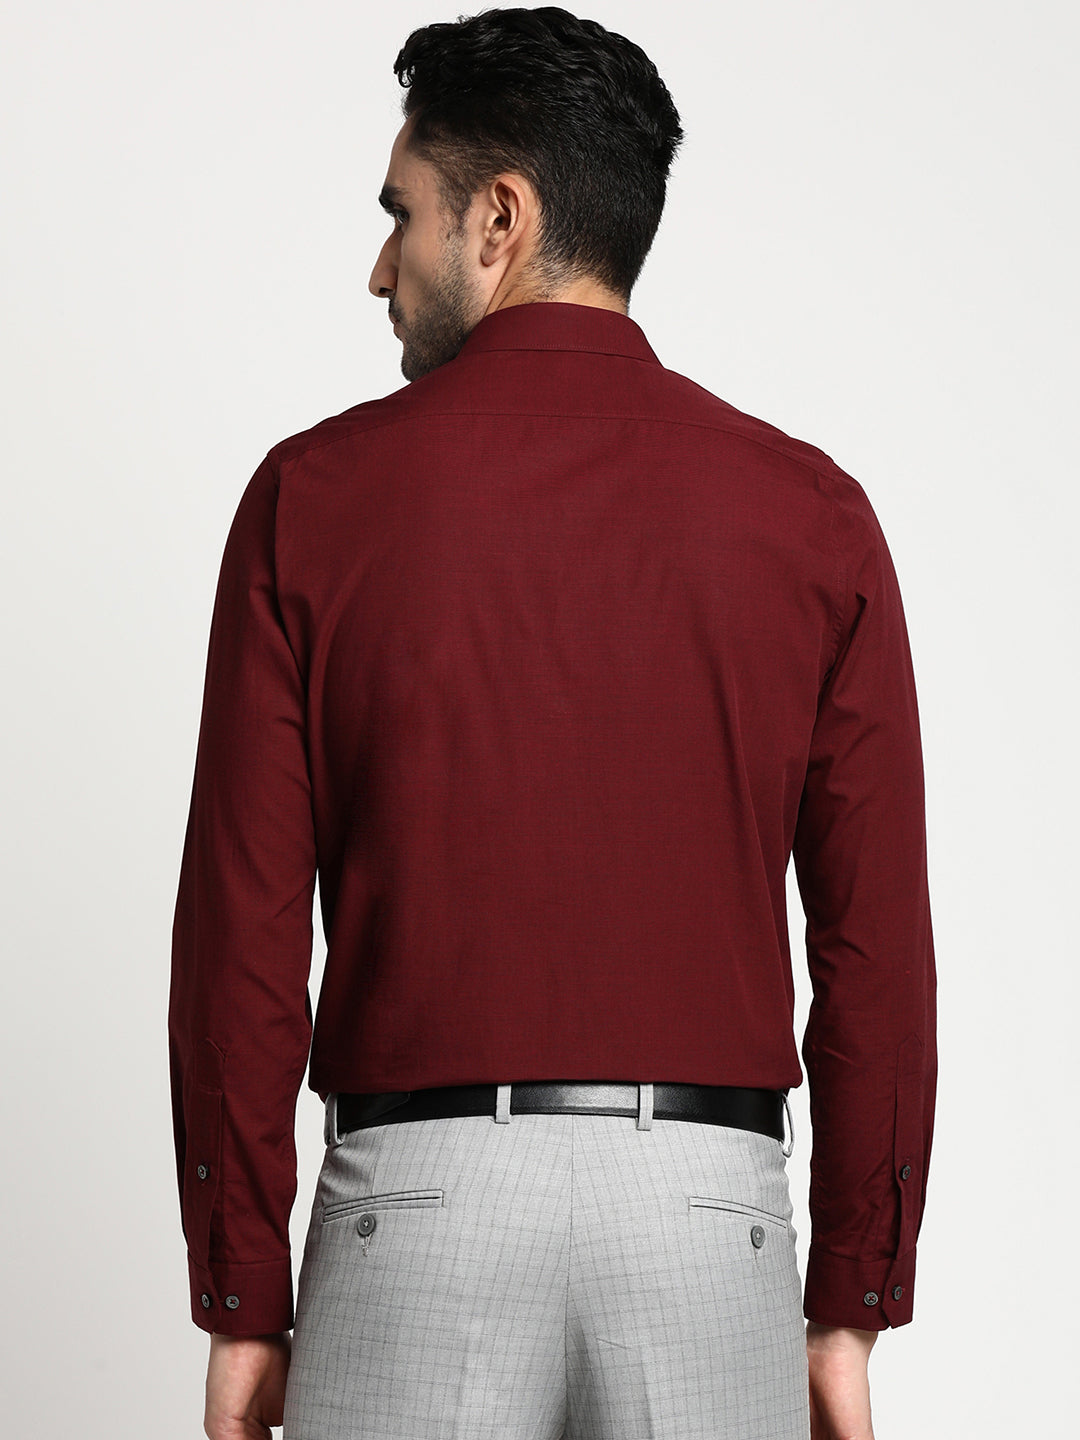 Cotton Maroon Slim Fit Solid Formal Shirt